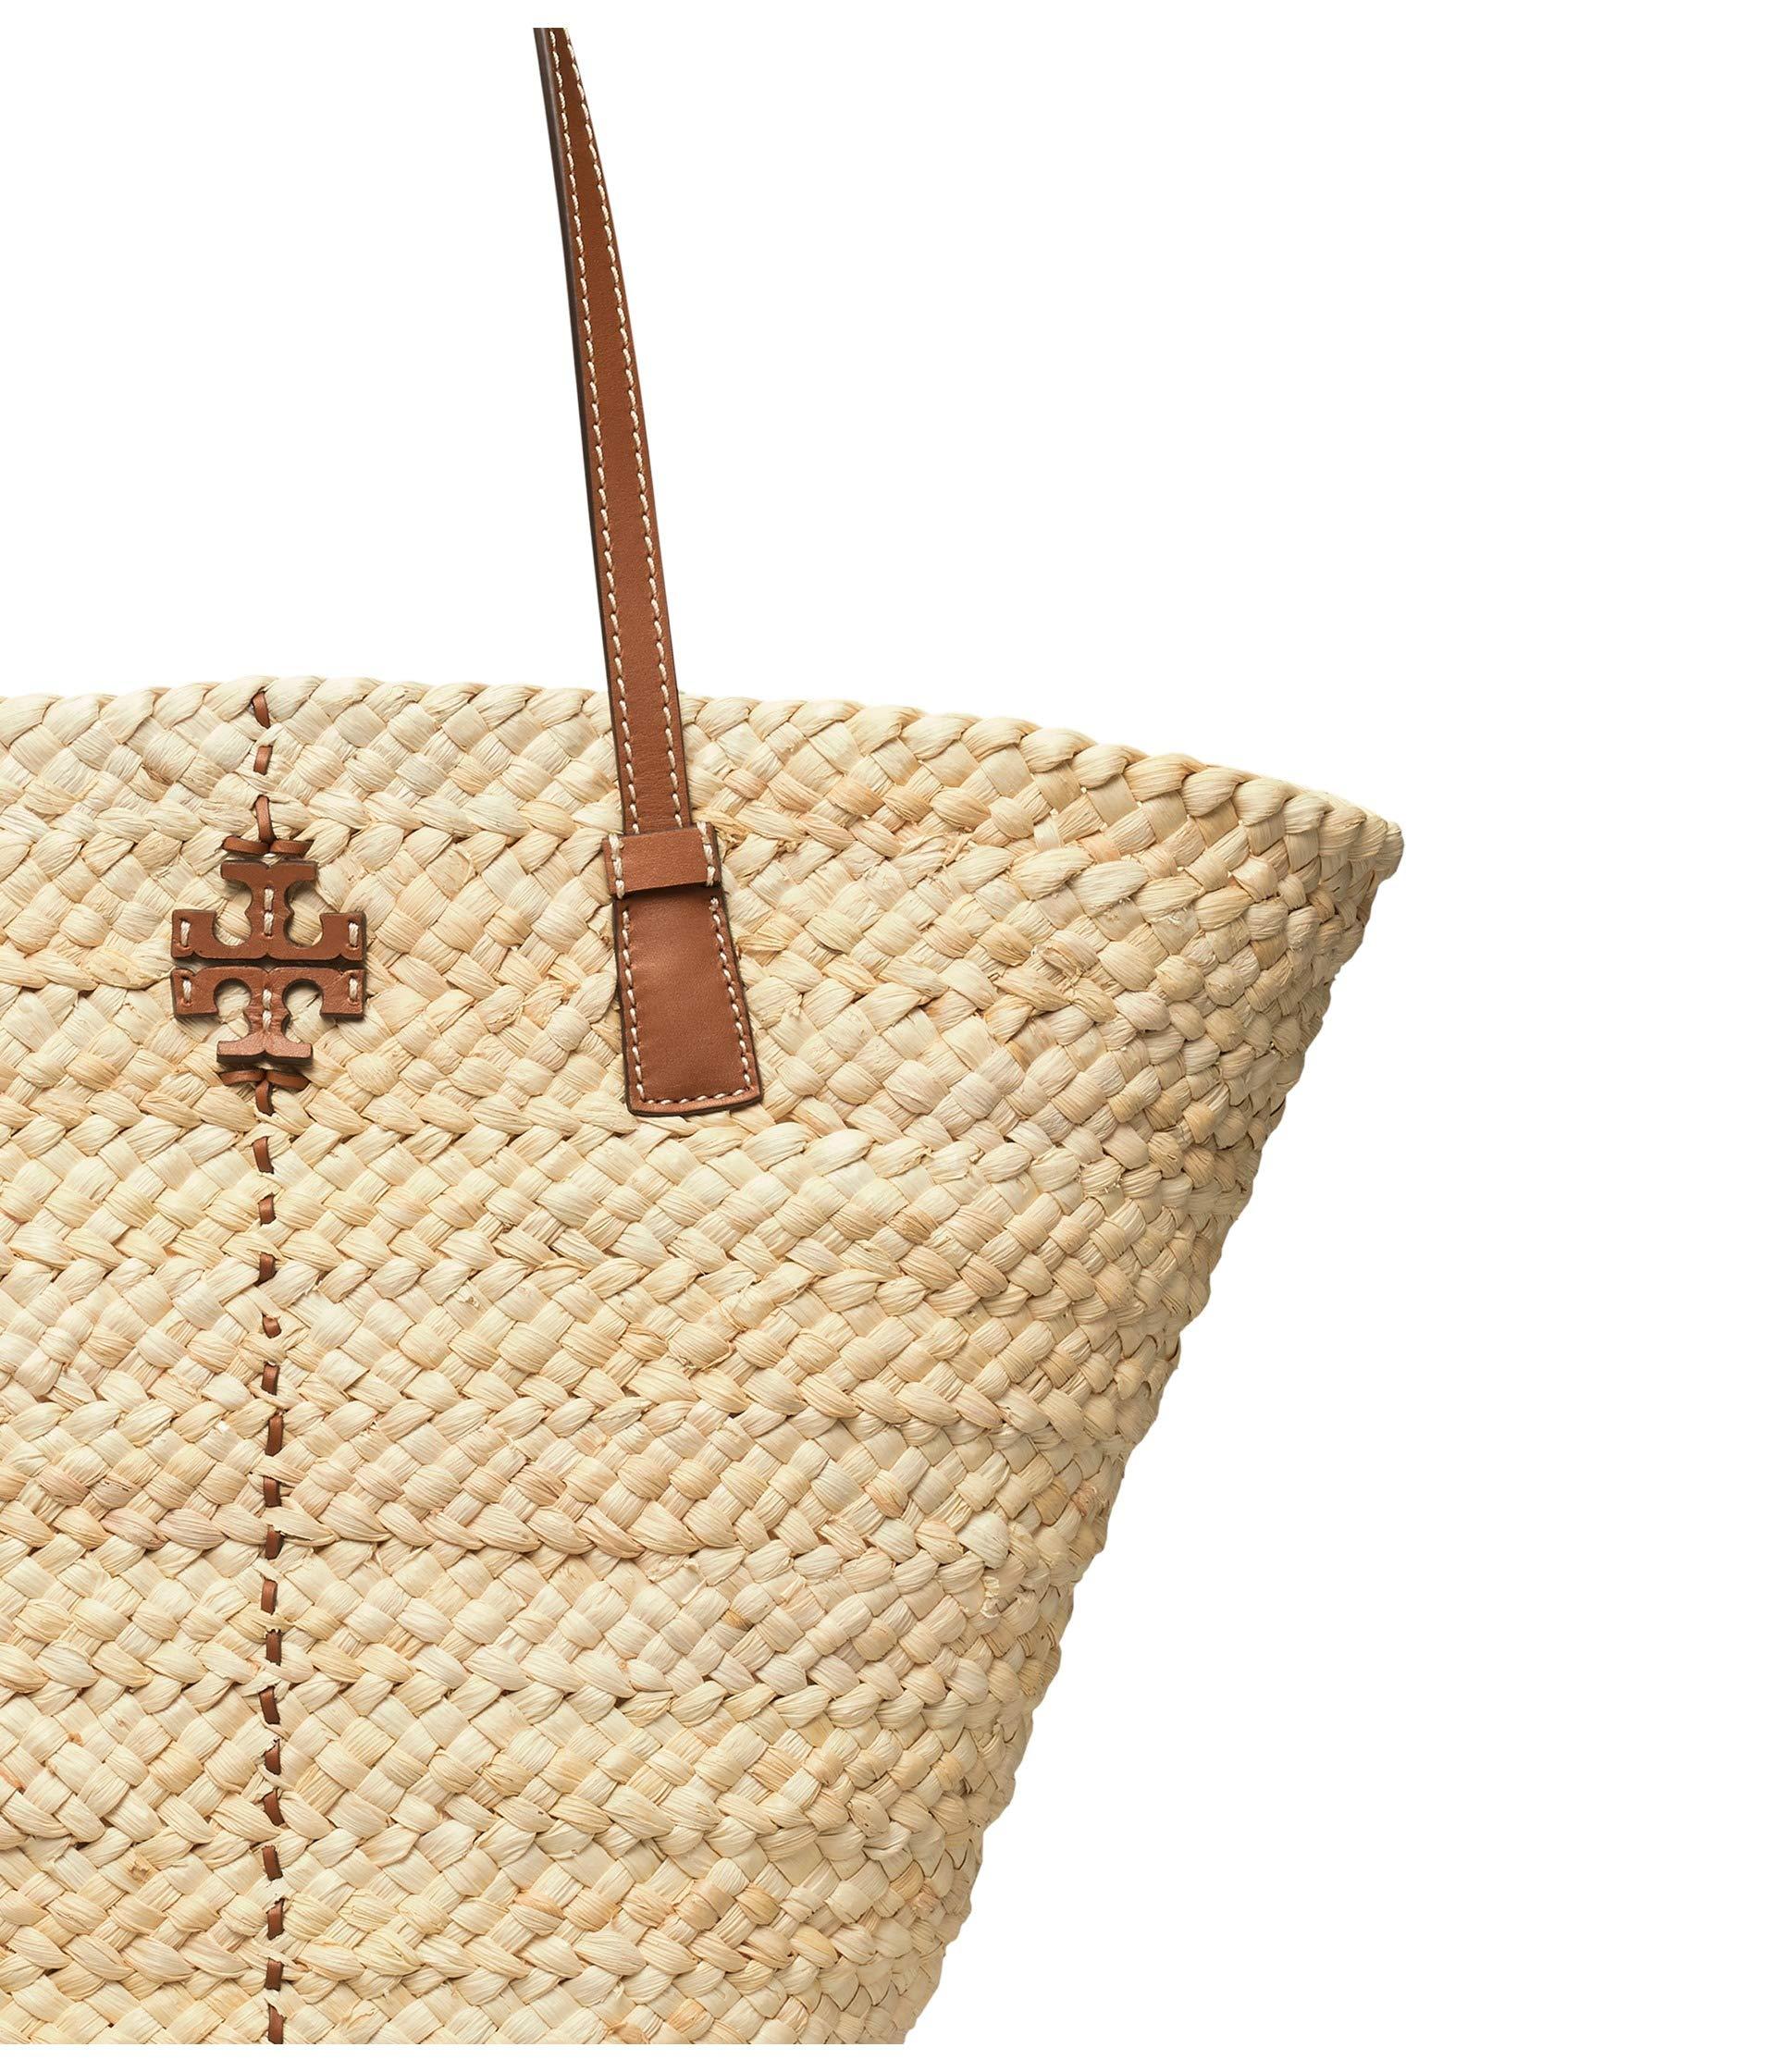 Tory Burch Mcgraw Straw Tote in Natural | Lyst